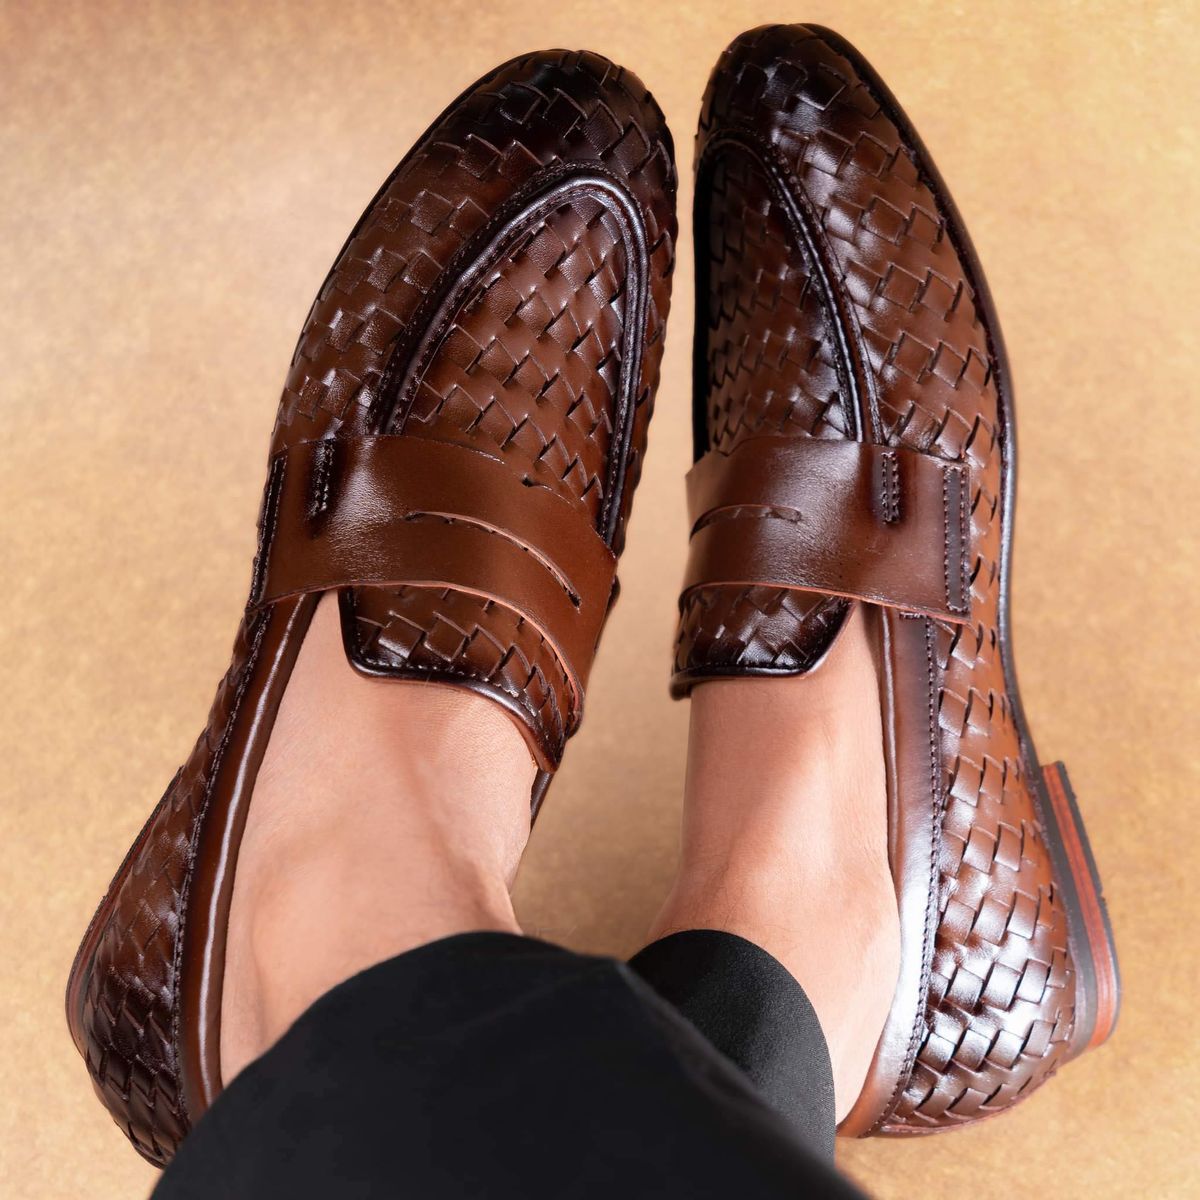 Penny Braided Loafer Cocoa Image